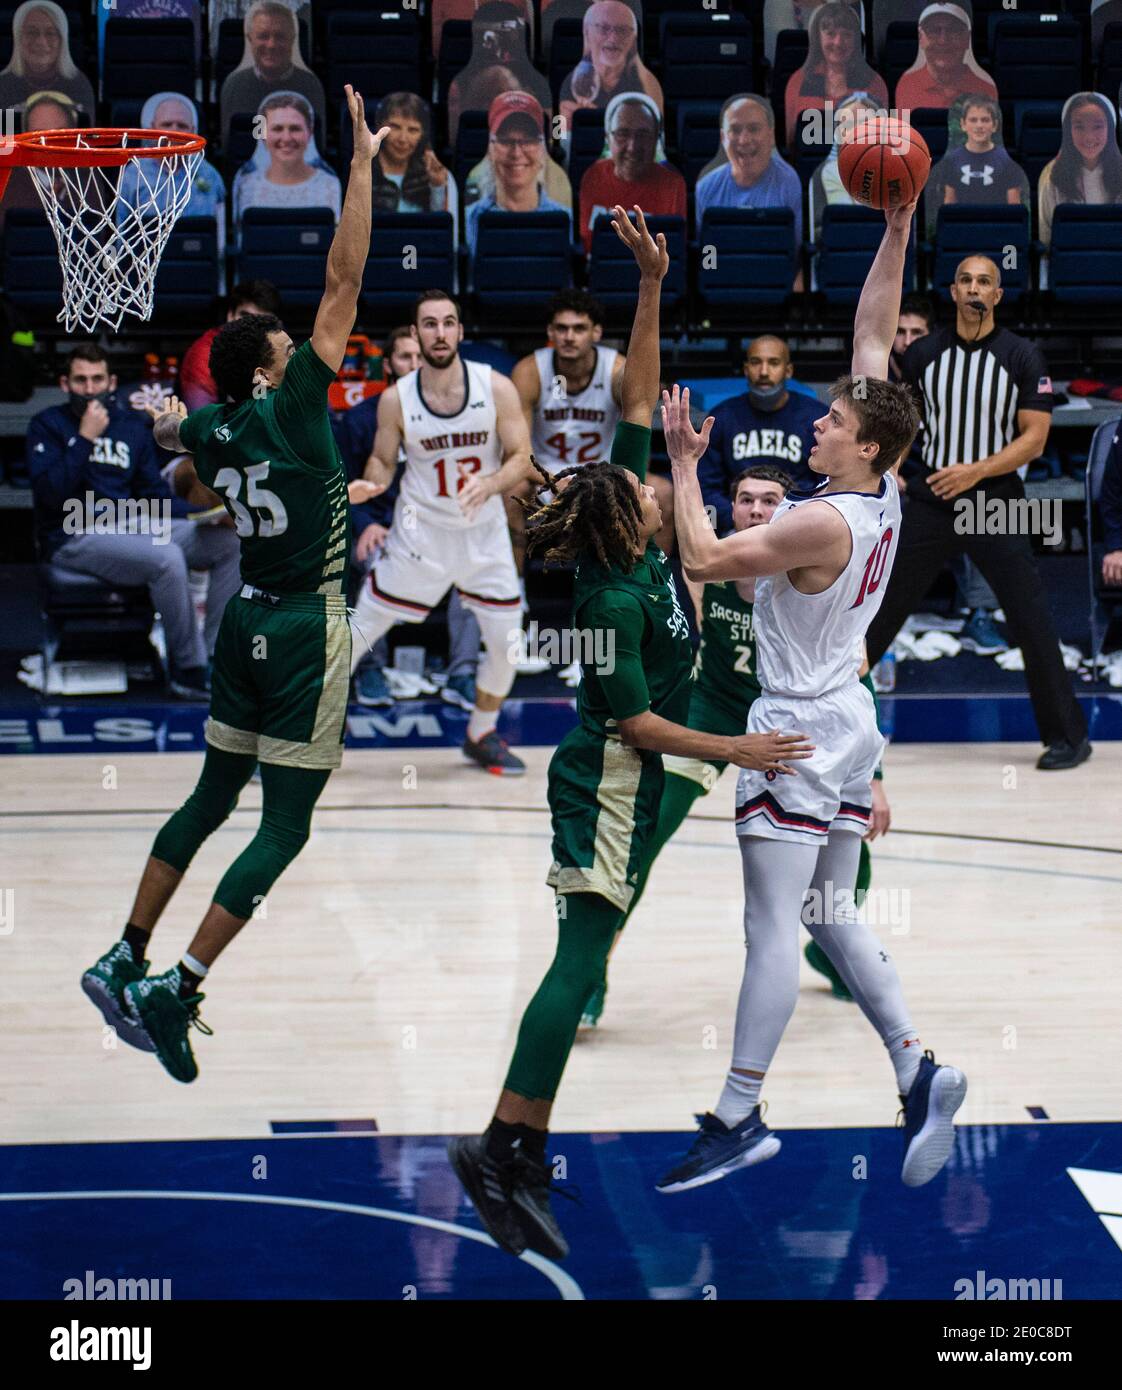 Moraga, CA U.S. 30th Dec, 2020. A. St. Mary's Gaels center Mitchell Saxen (10) takes a shot a the top of the key during the NCAA Men's Basketball game between Sacramento State Hornets and the Saint Mary's Gaels 63-45 win at McKeon Pavilion Moraga Calif. Thurman James/CSM/Alamy Live News Stock Photo